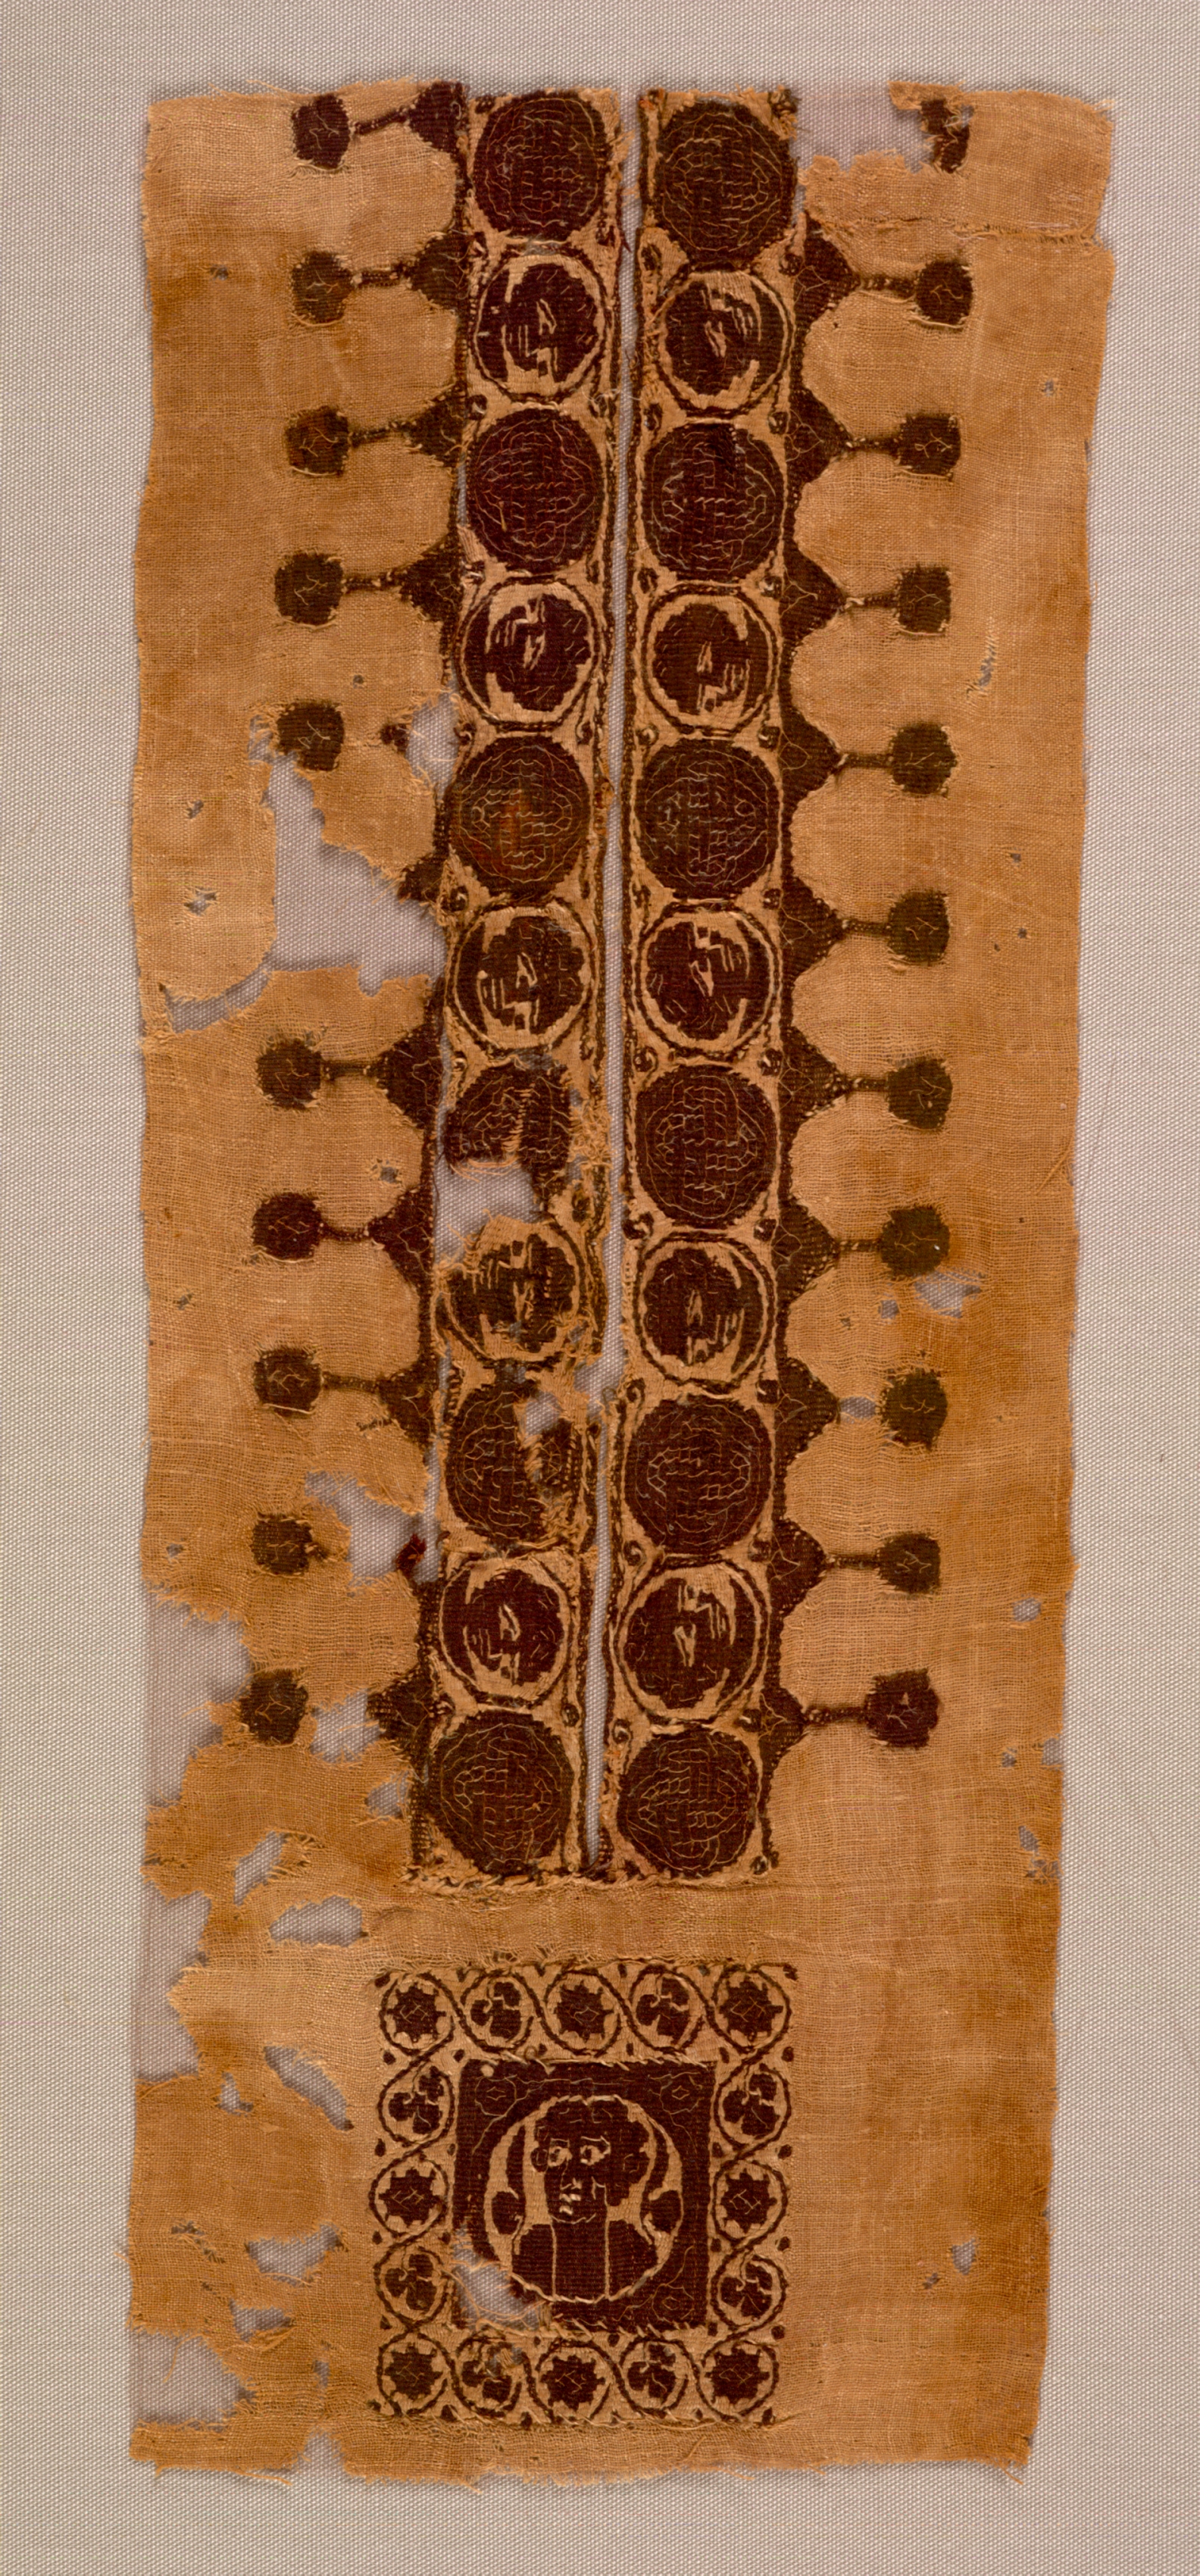 Neck and Shoulder Decoration from a Tunic